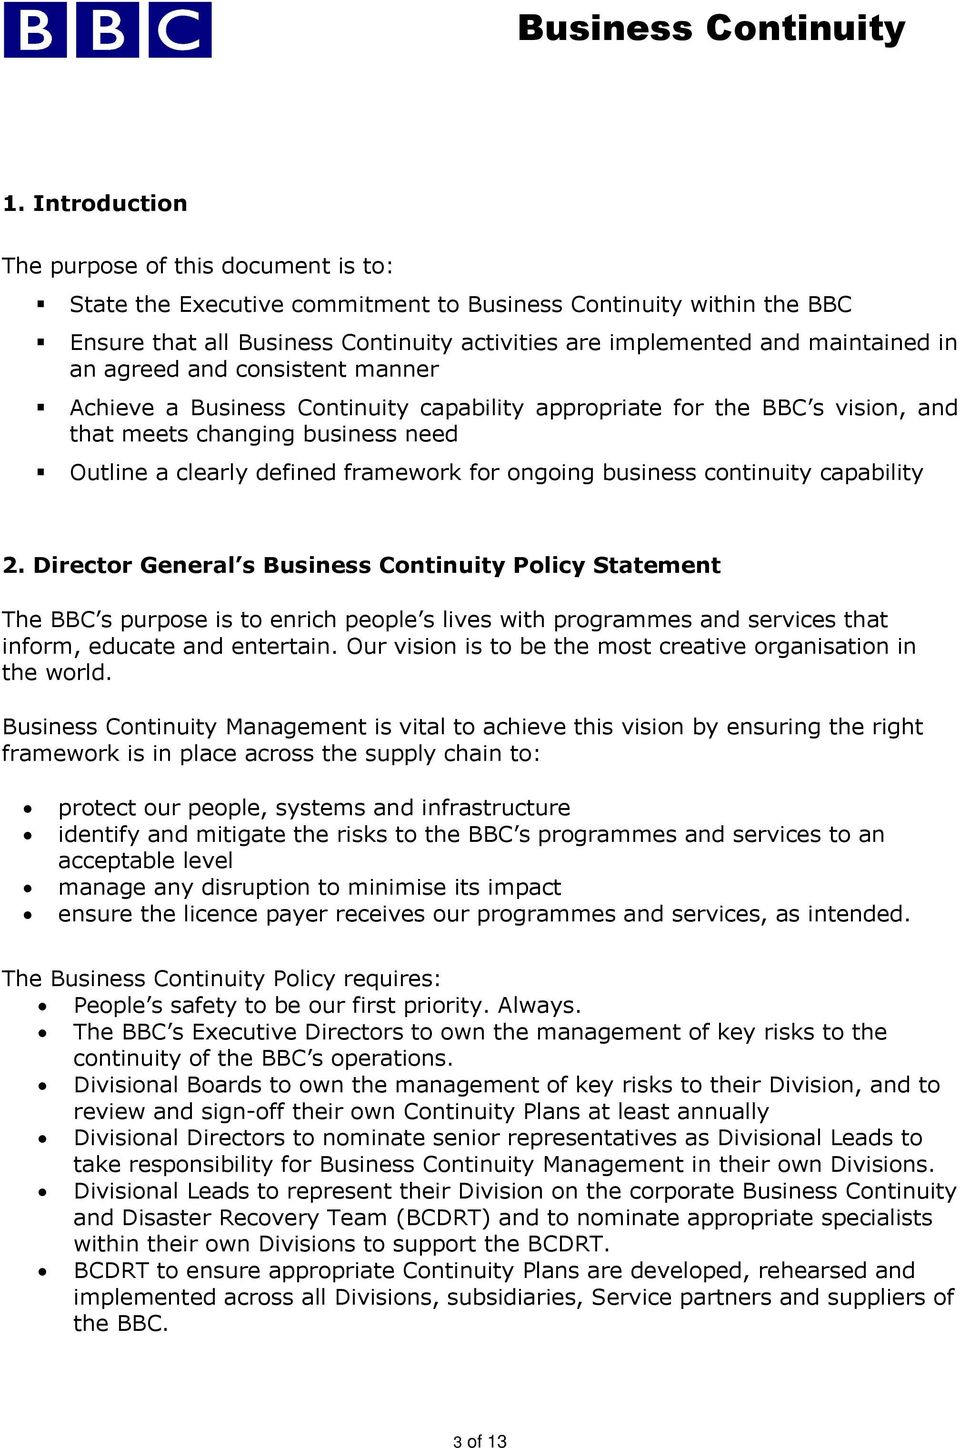 Business Continuity Management Policy - PDF Free Download Regarding Business Continuity Management Policy Template